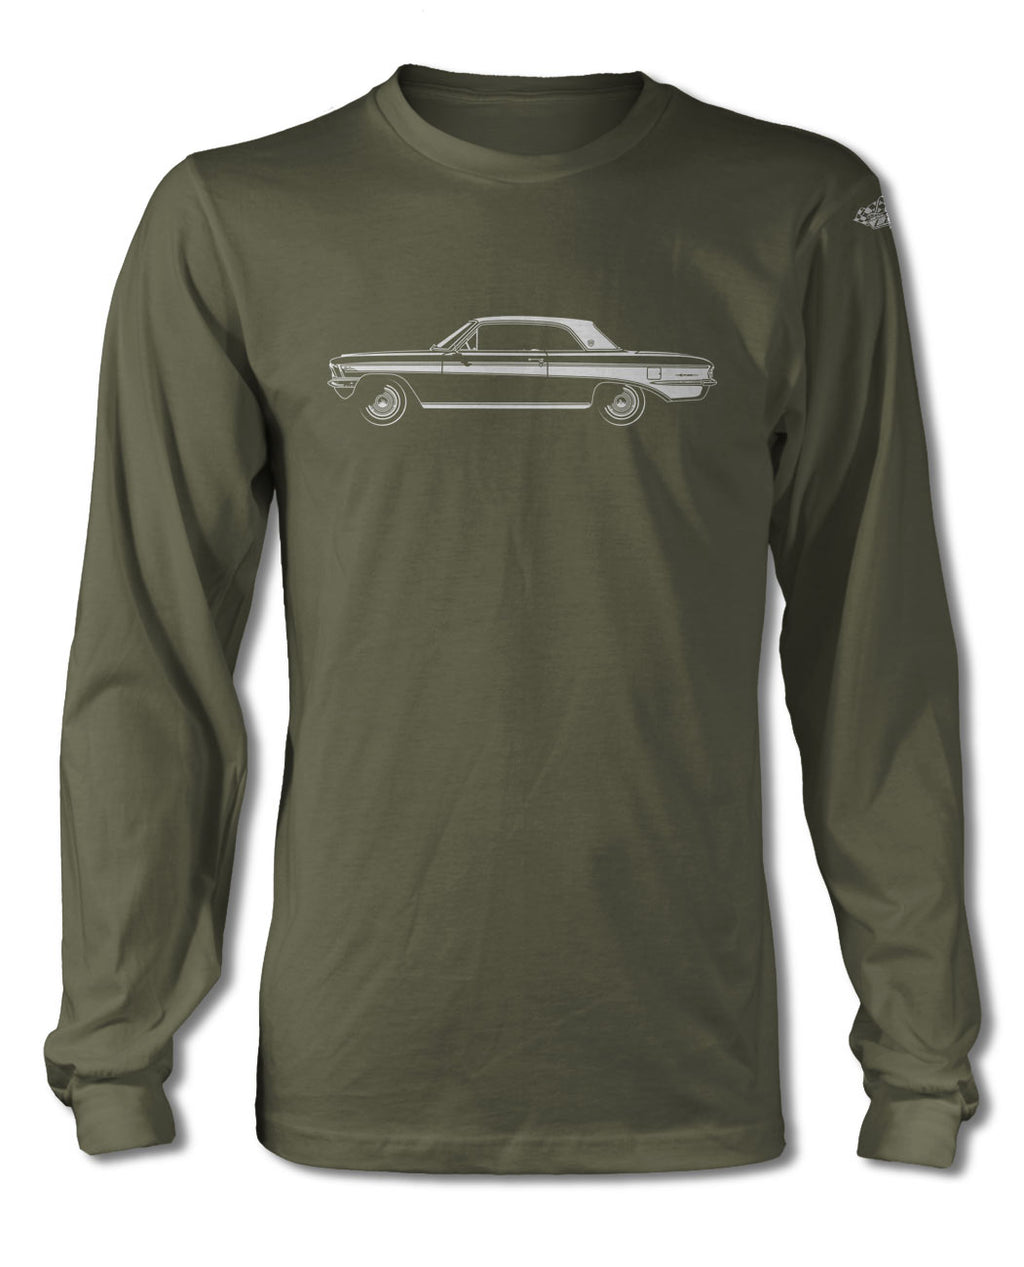 1962 Oldsmobile Cutlass Coupe T-Shirt - Long Sleeves - Side View